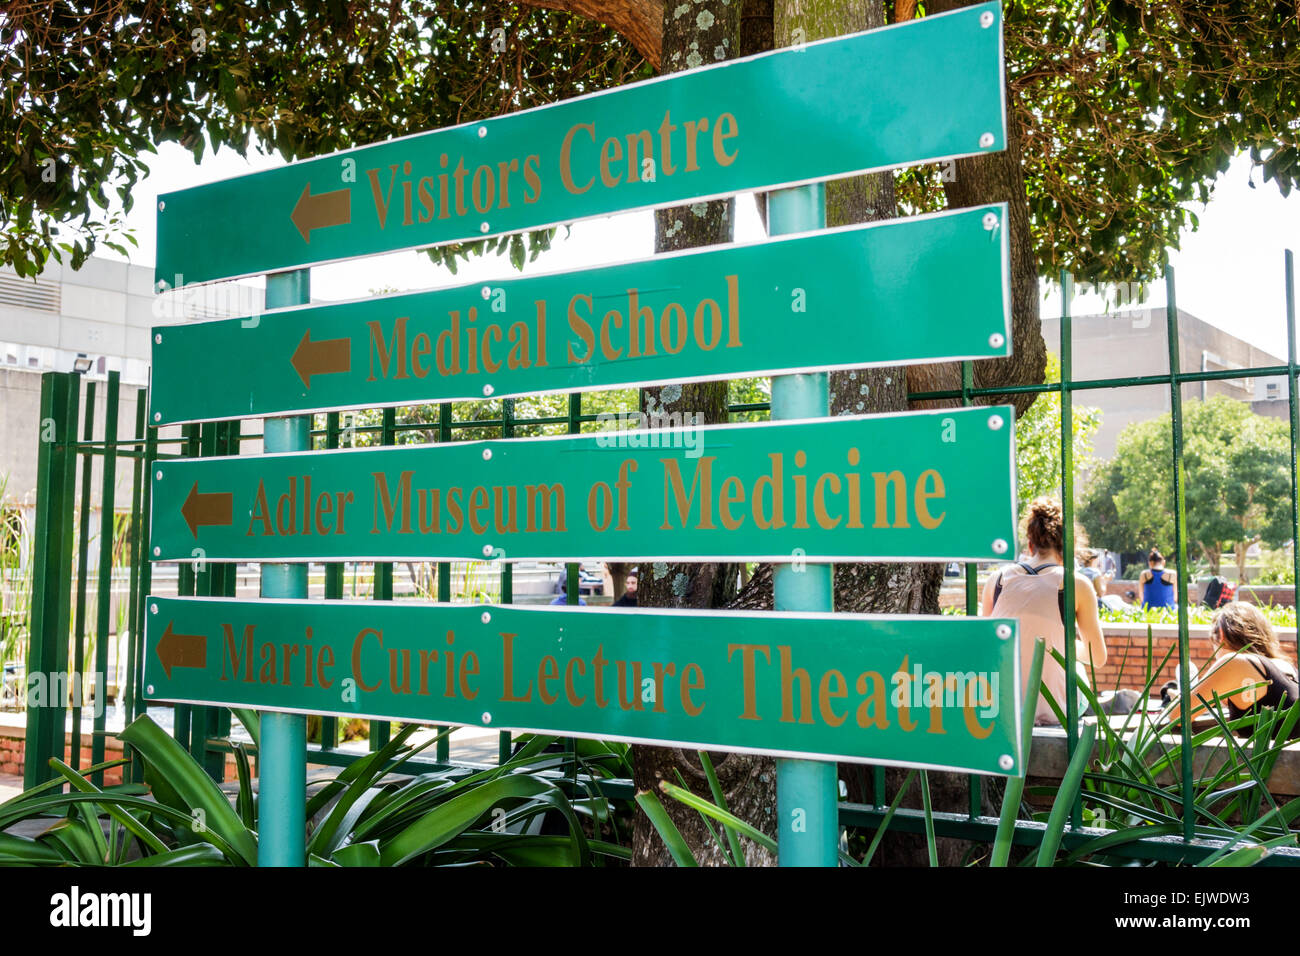 Johannesburg South Africa,African Parktown,Wits University,University of the Witwatersrand,Health Sciences Campus,Adler Museum of Medicine,medical sch Stock Photo